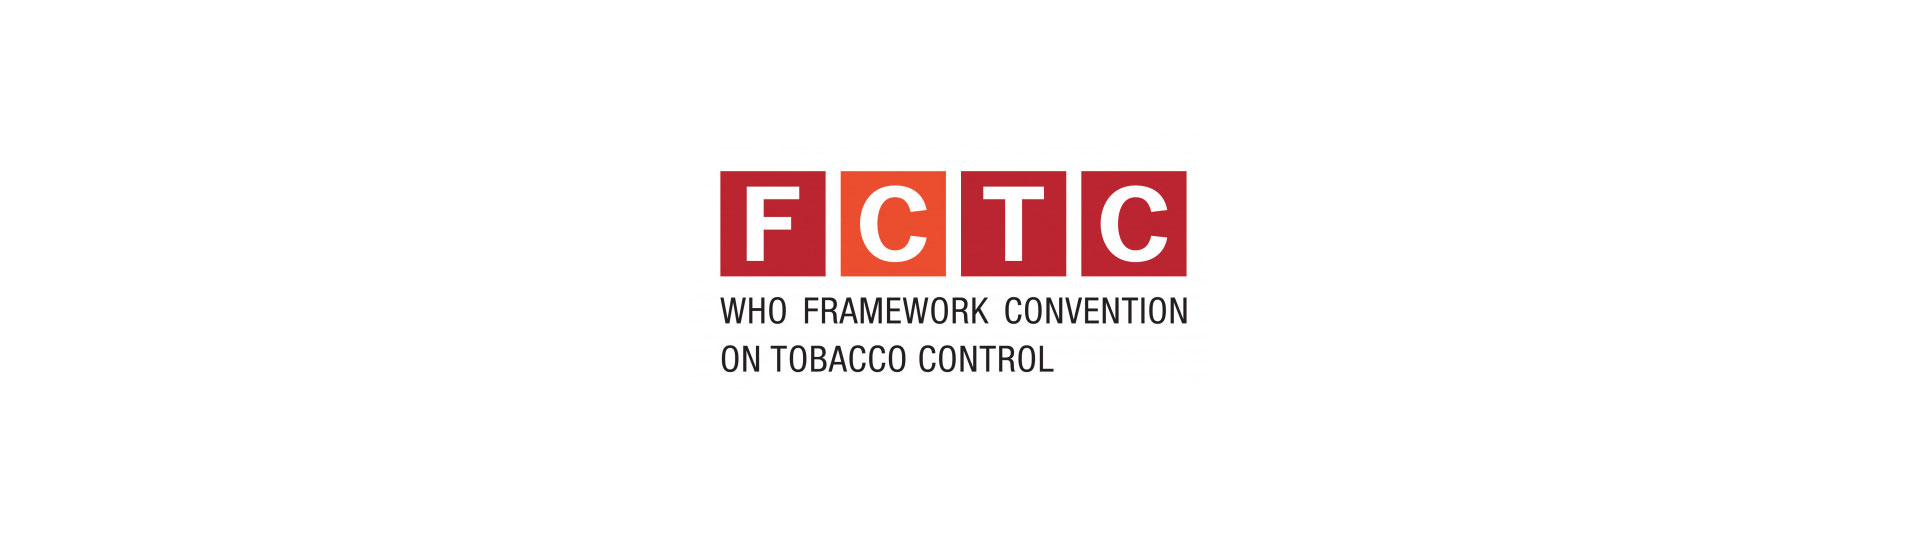 Material on the Tobacco Convention